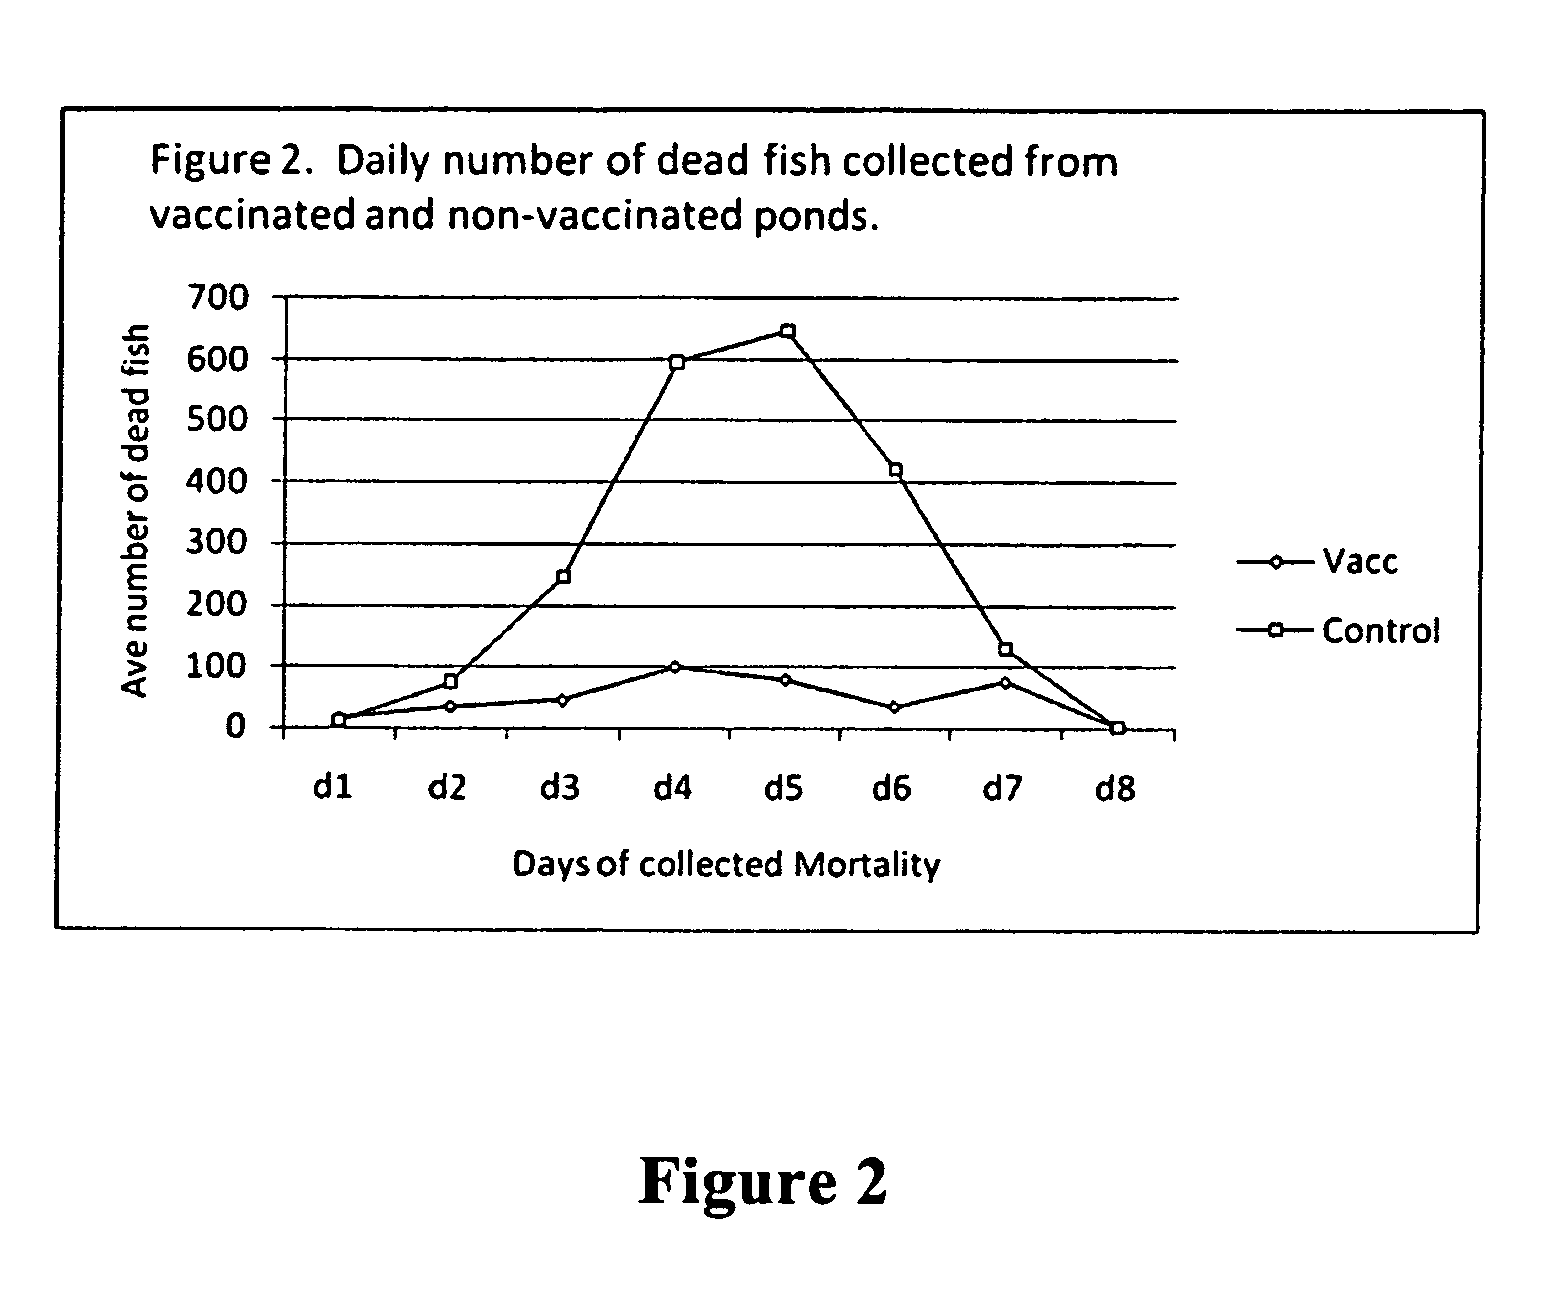 Oral vaccination of fish with live attenuated <i>Edwardsiella ictaluri </i>vaccines